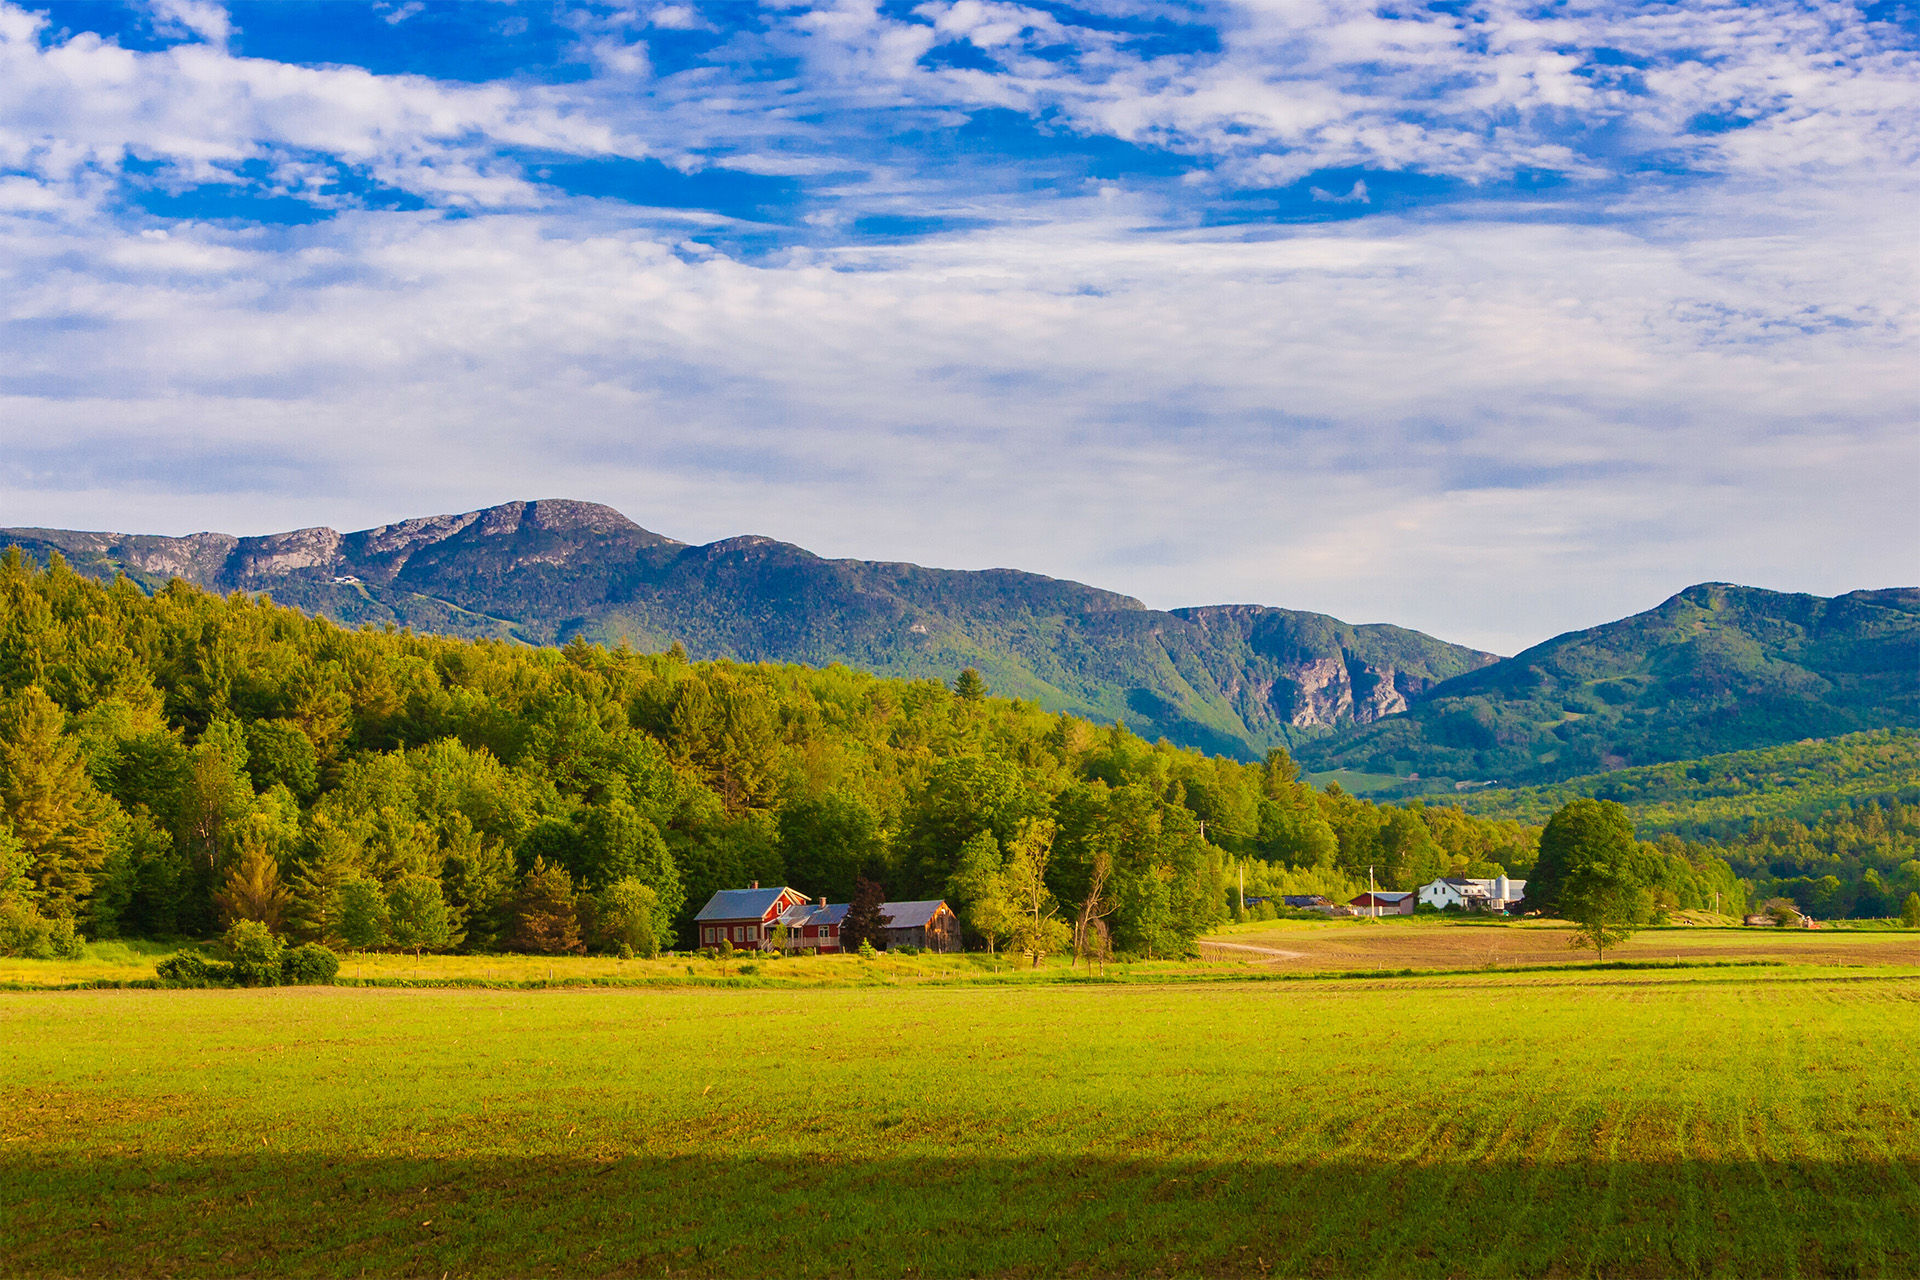 Brightly colored photo showing a pasture and farmhouses in front of a line of trees, with mountains in the background -- all under a partly cloudy blue sky.